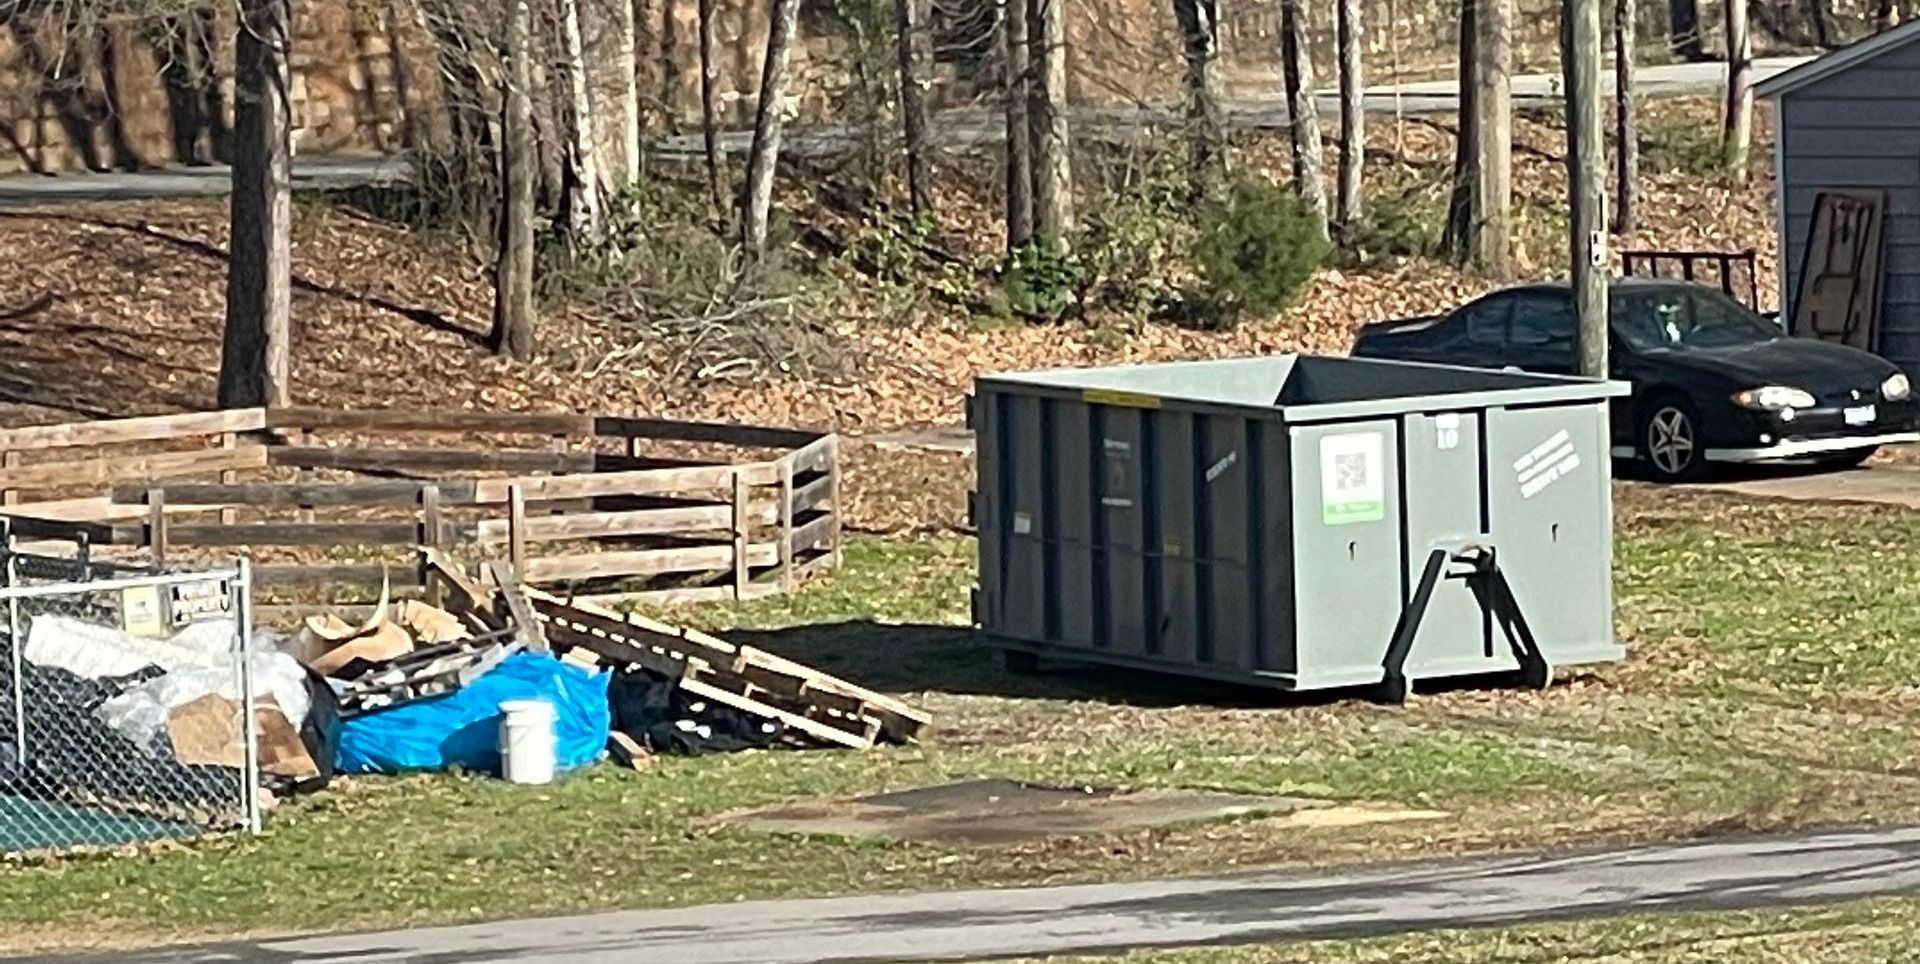 dumpster rental for house cleanout in Spartanburg sc